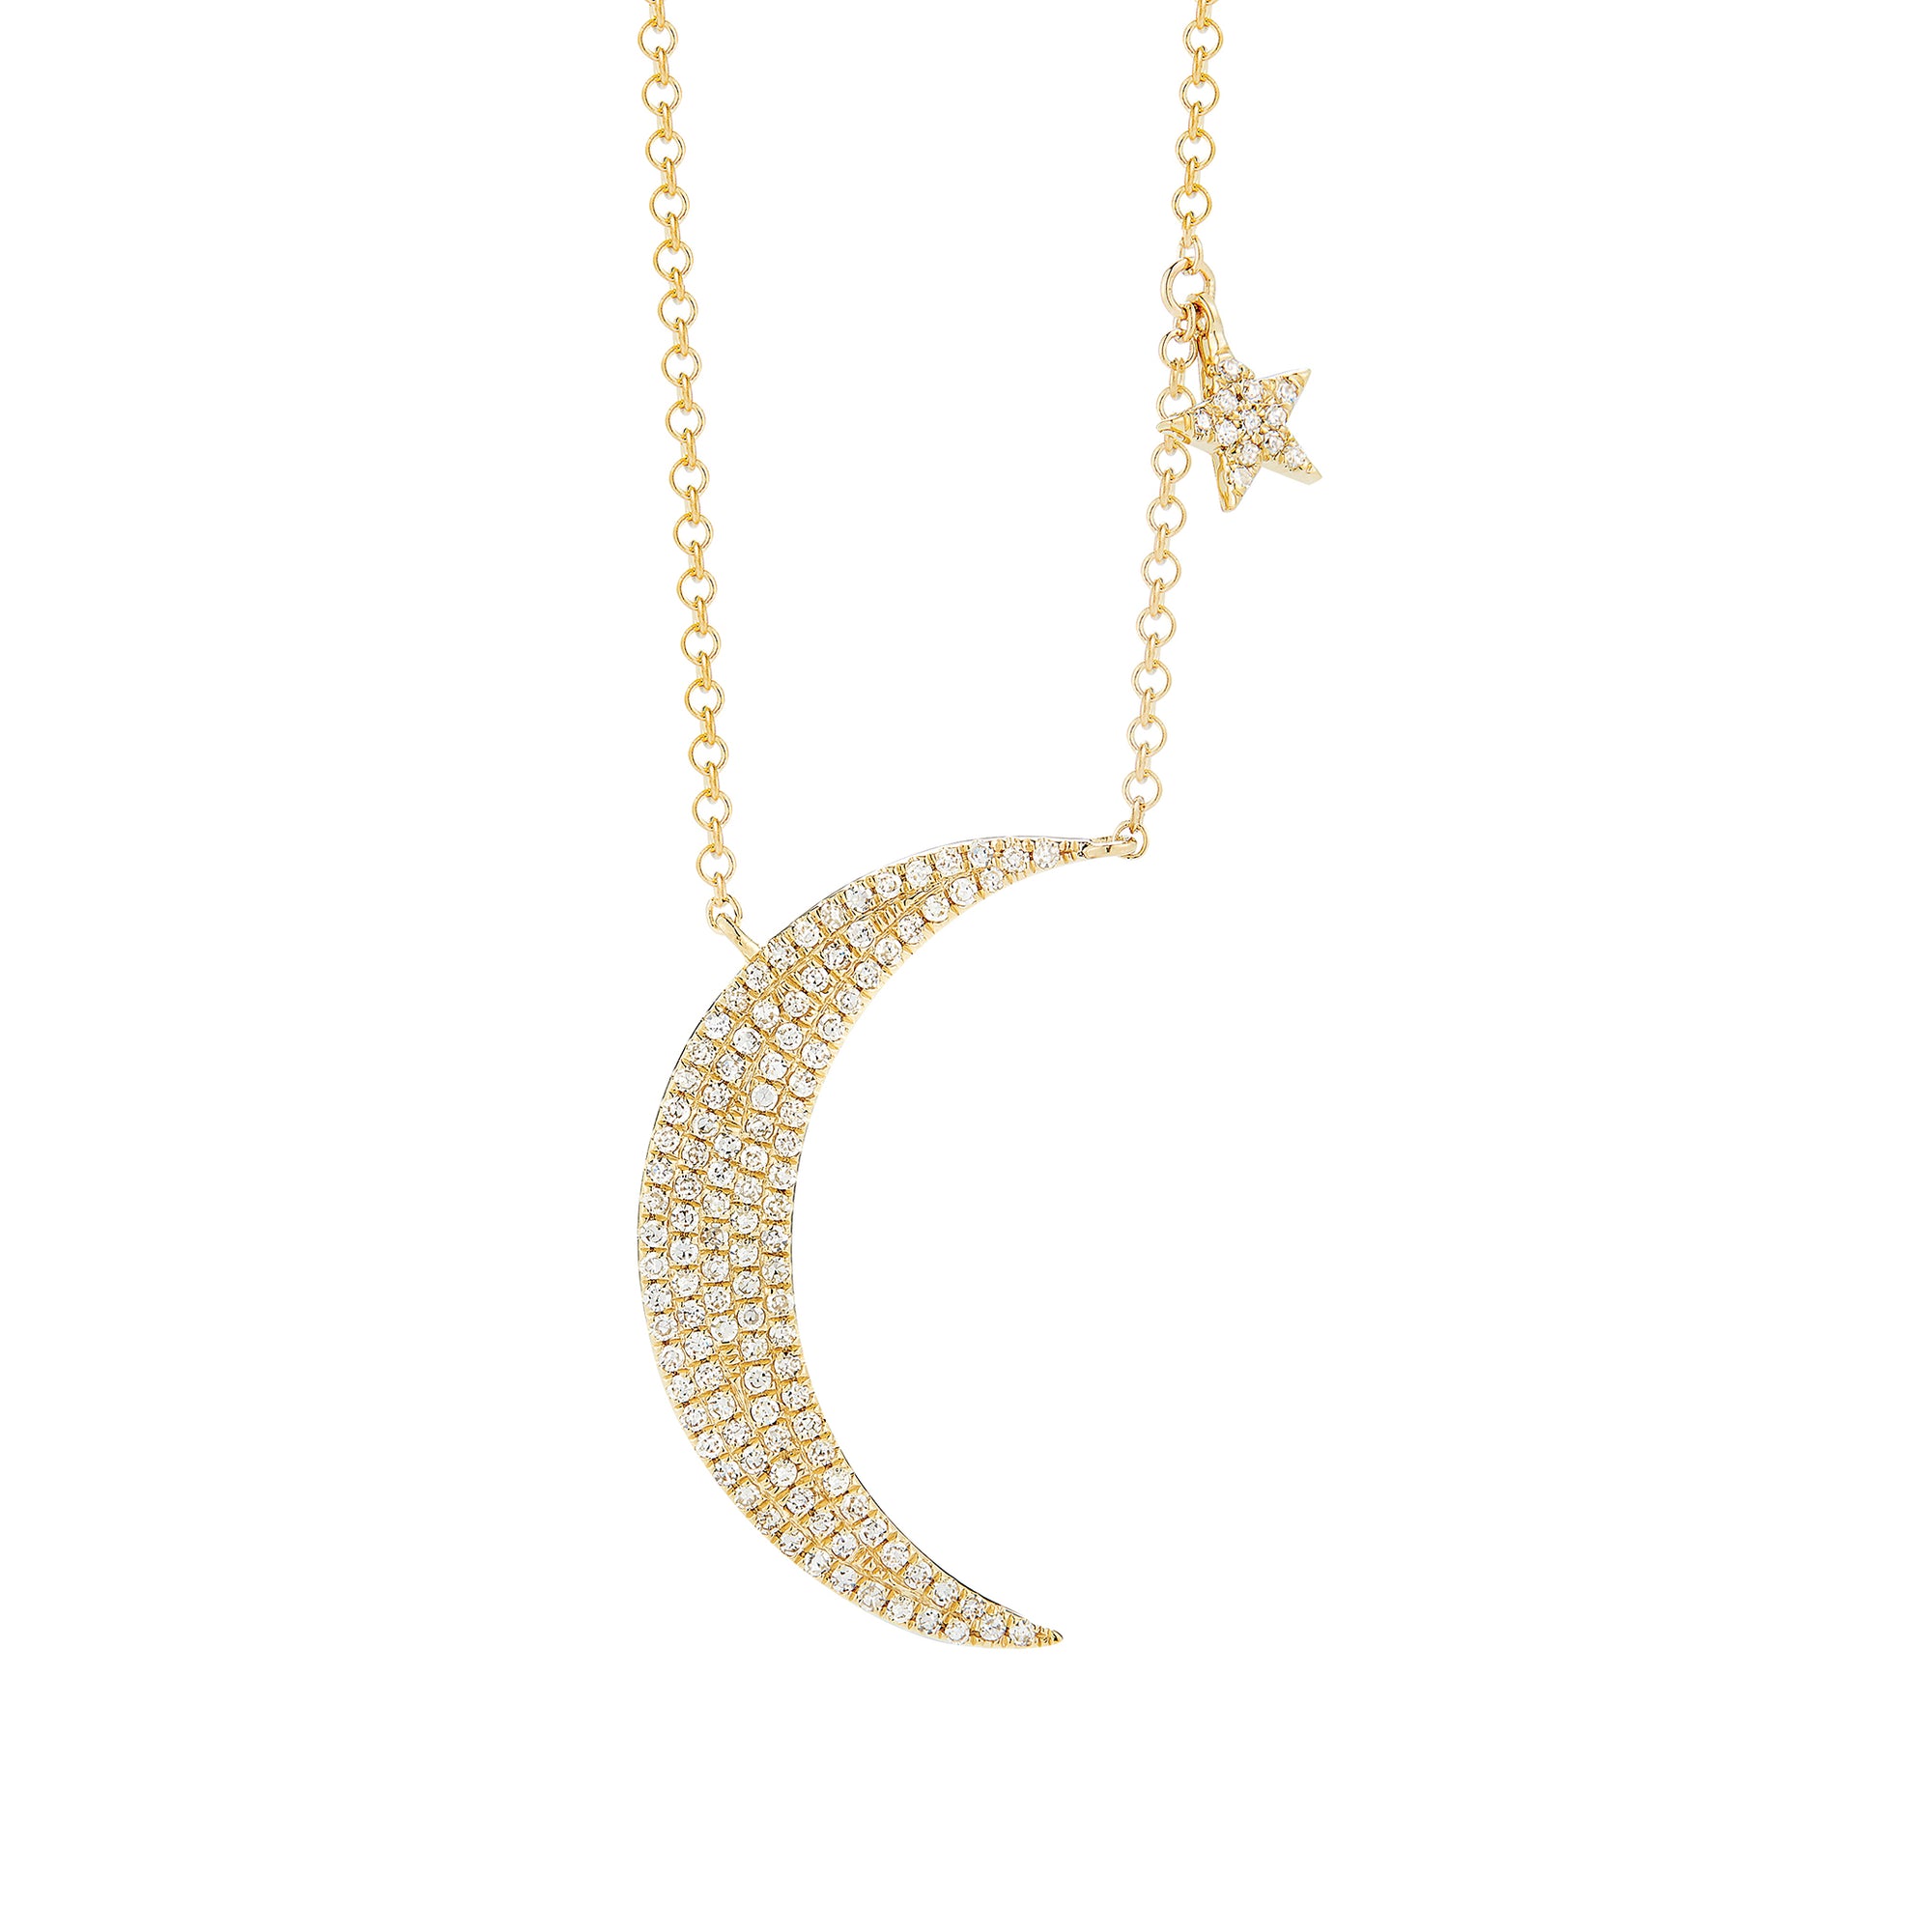 Pave Diamond Moon and Star Necklace  -14K yellow gold weighing 2.50 grams  -125 round pave-set diamonds totaling 0.27 carats.